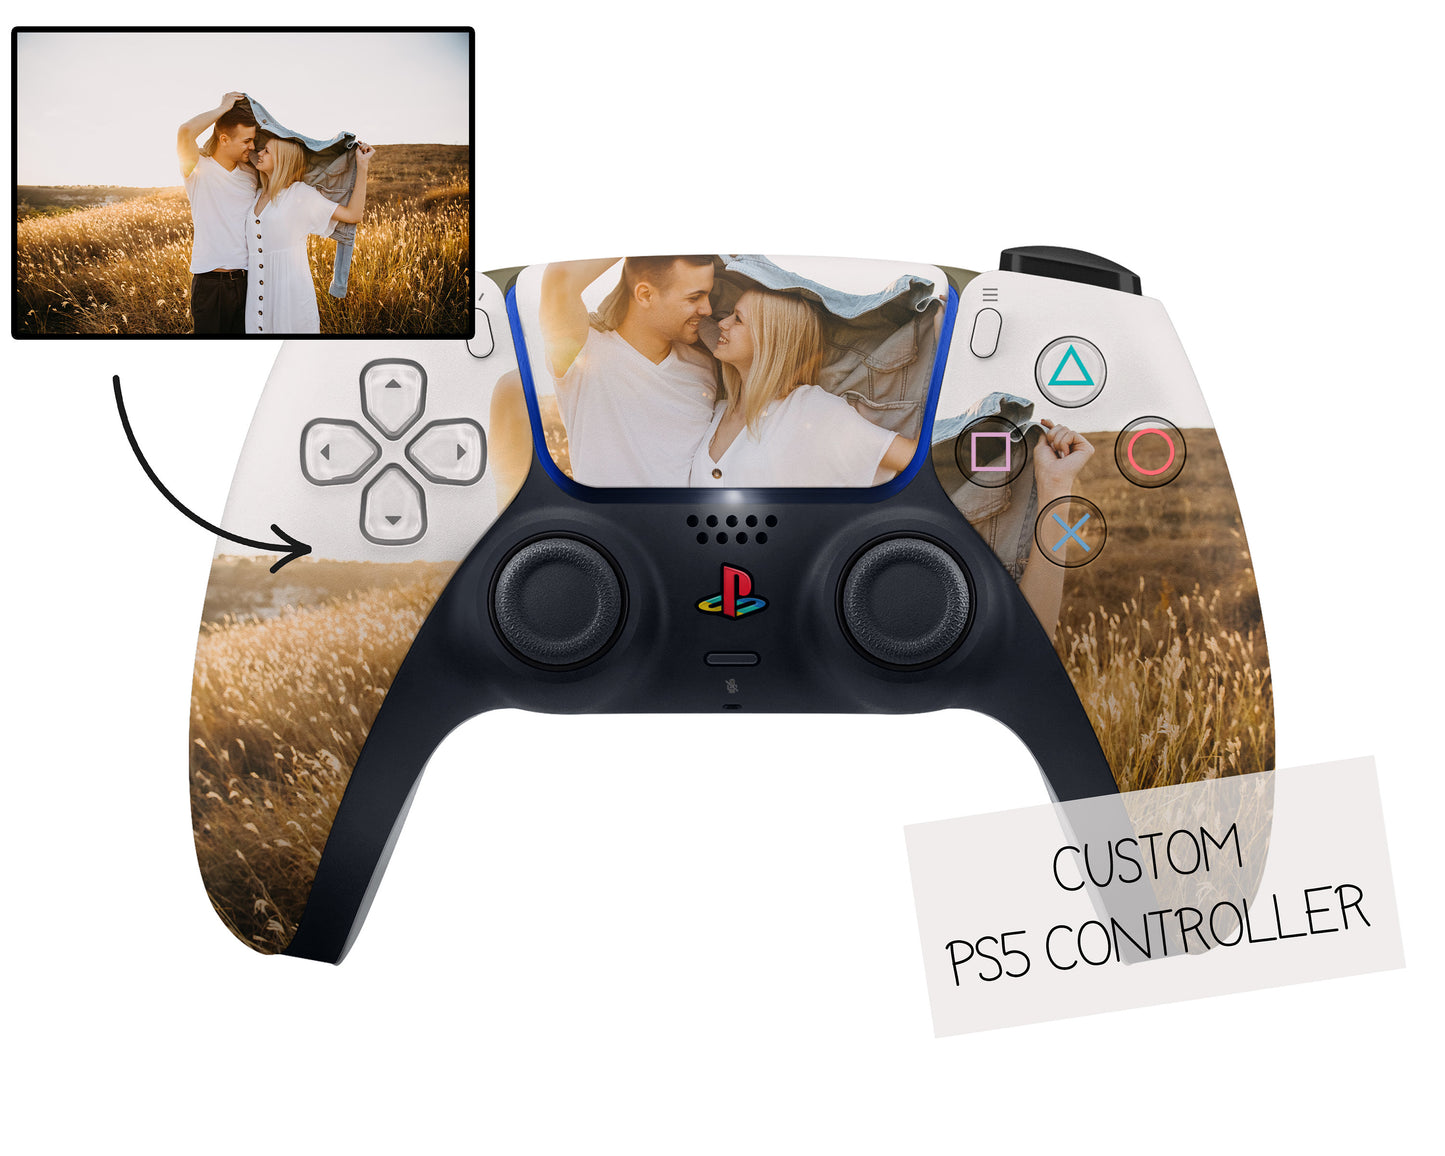 Create Your Own PS5 Controller Skin